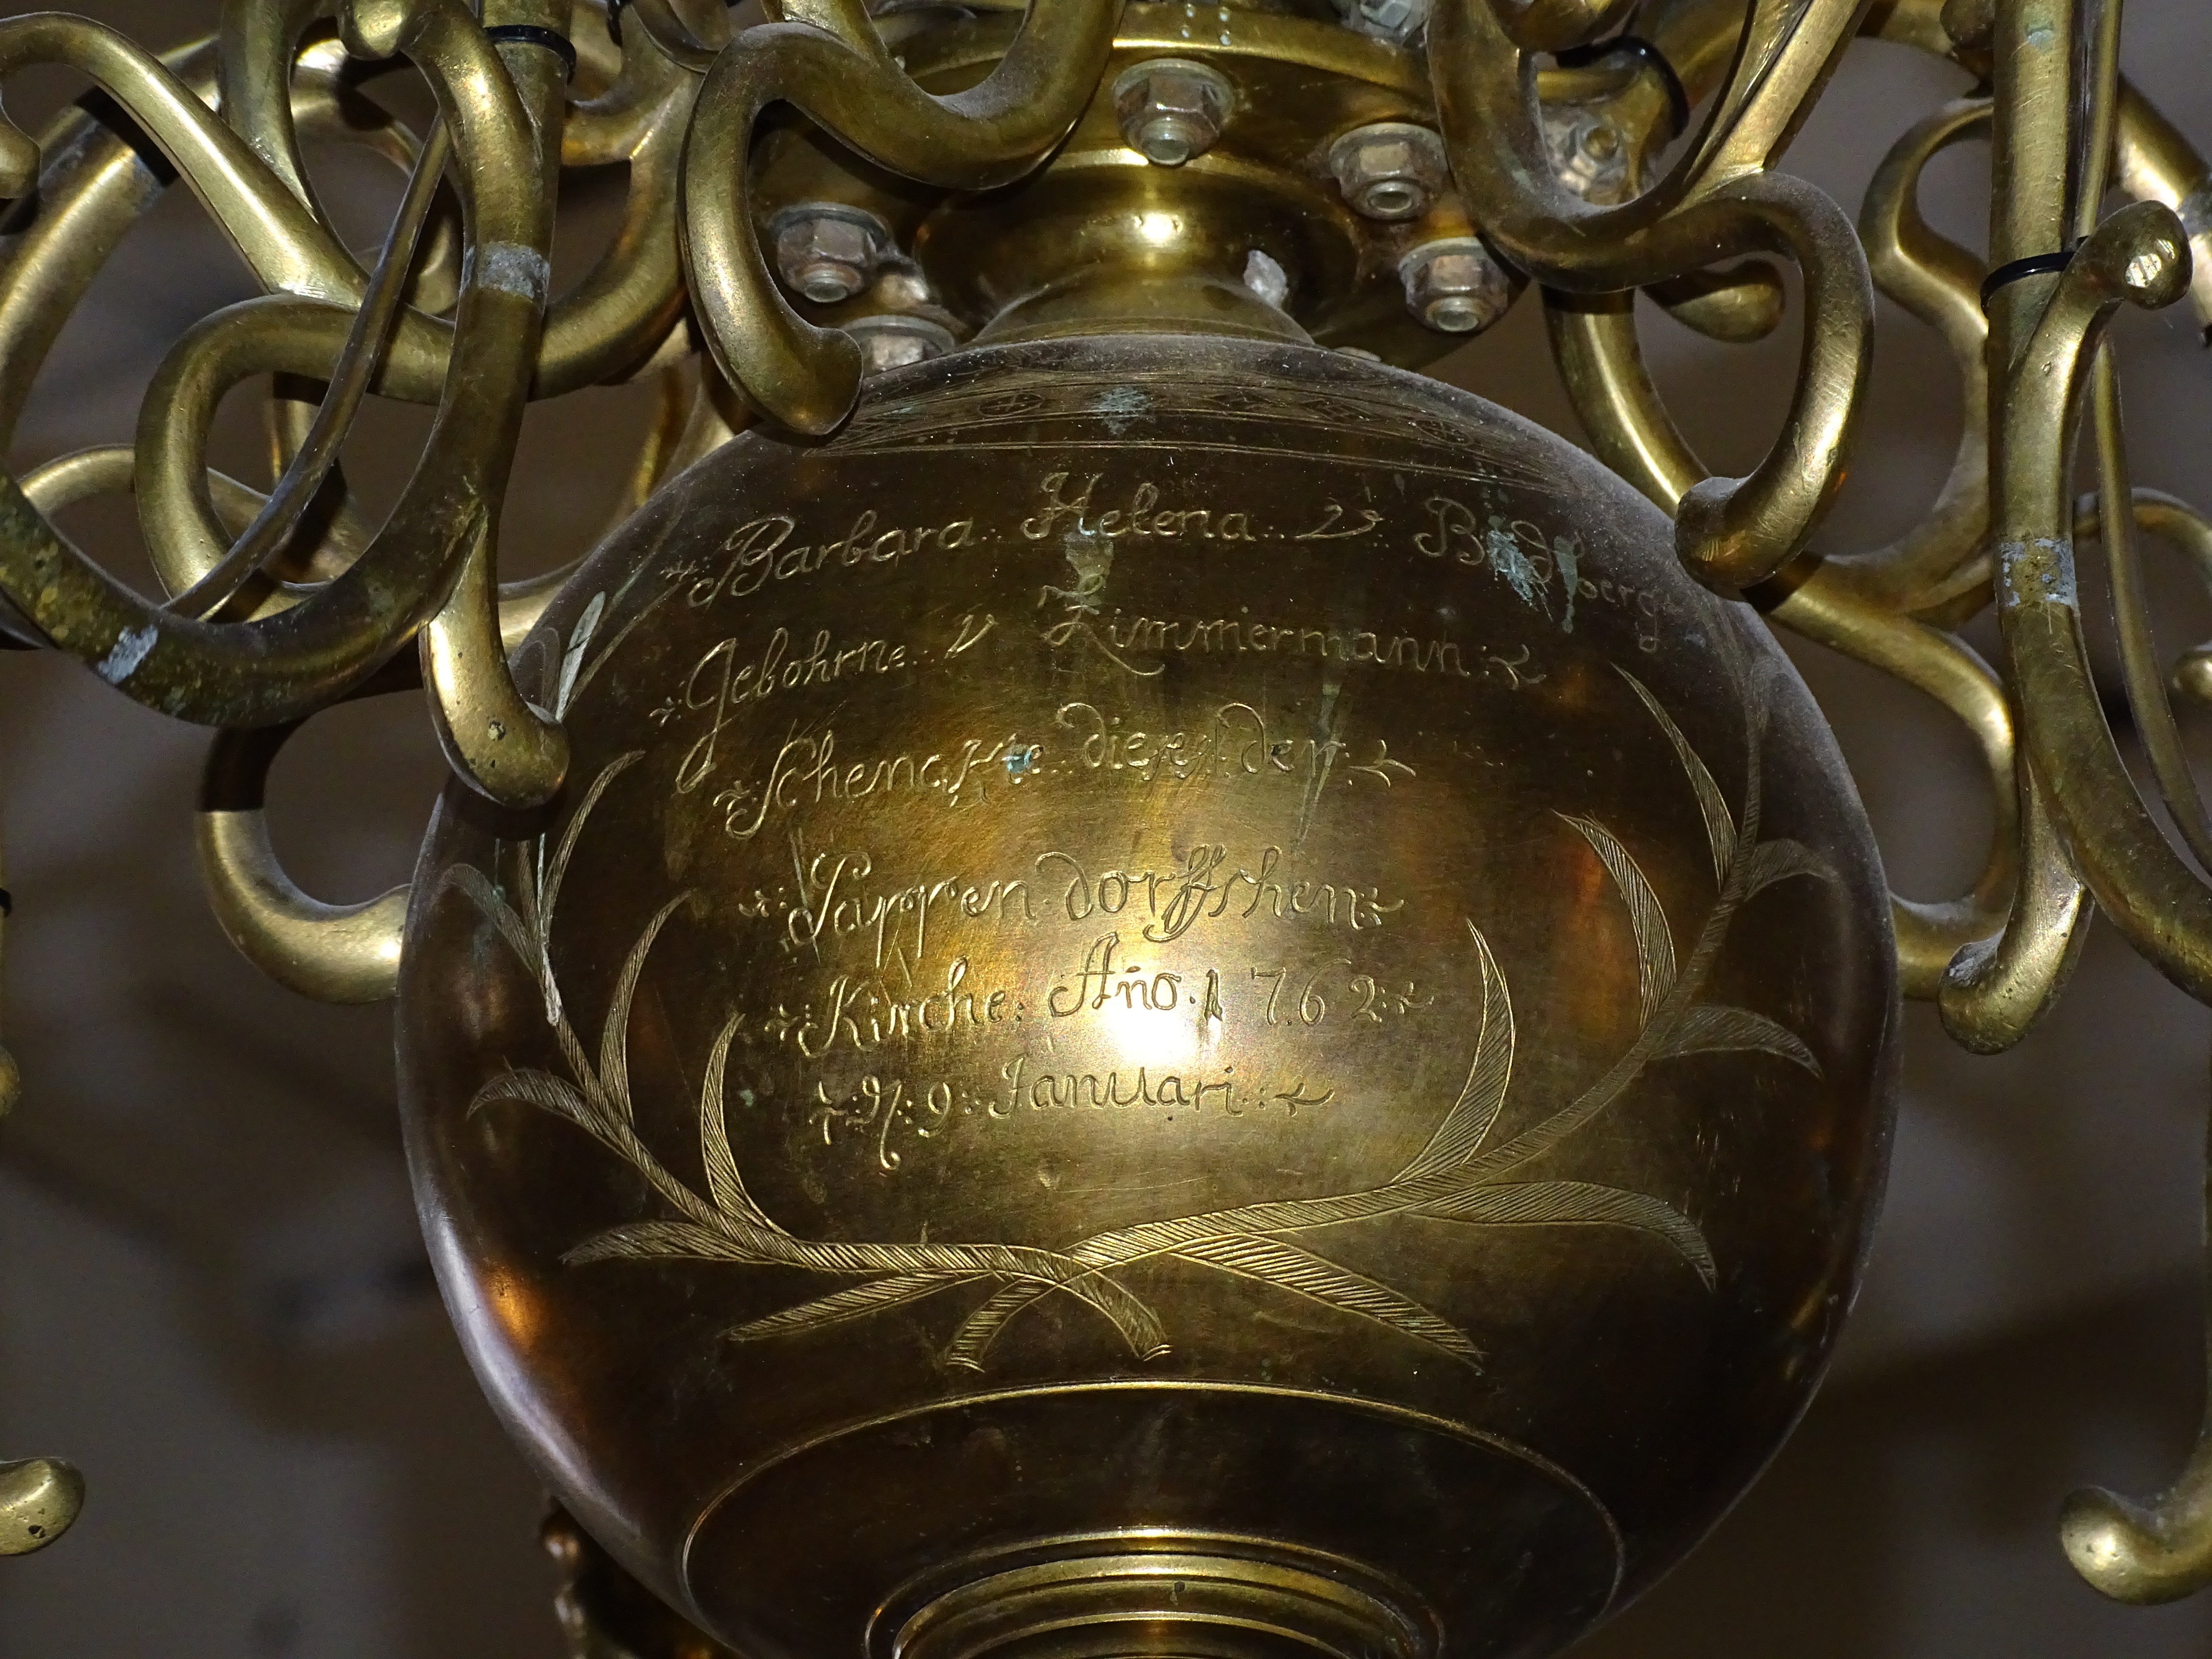 A fragment of the chandelier, 1762, Rubenes Evangelical Lutheran Church. Photo by Alantė Valtaitė-Gagač , 2021